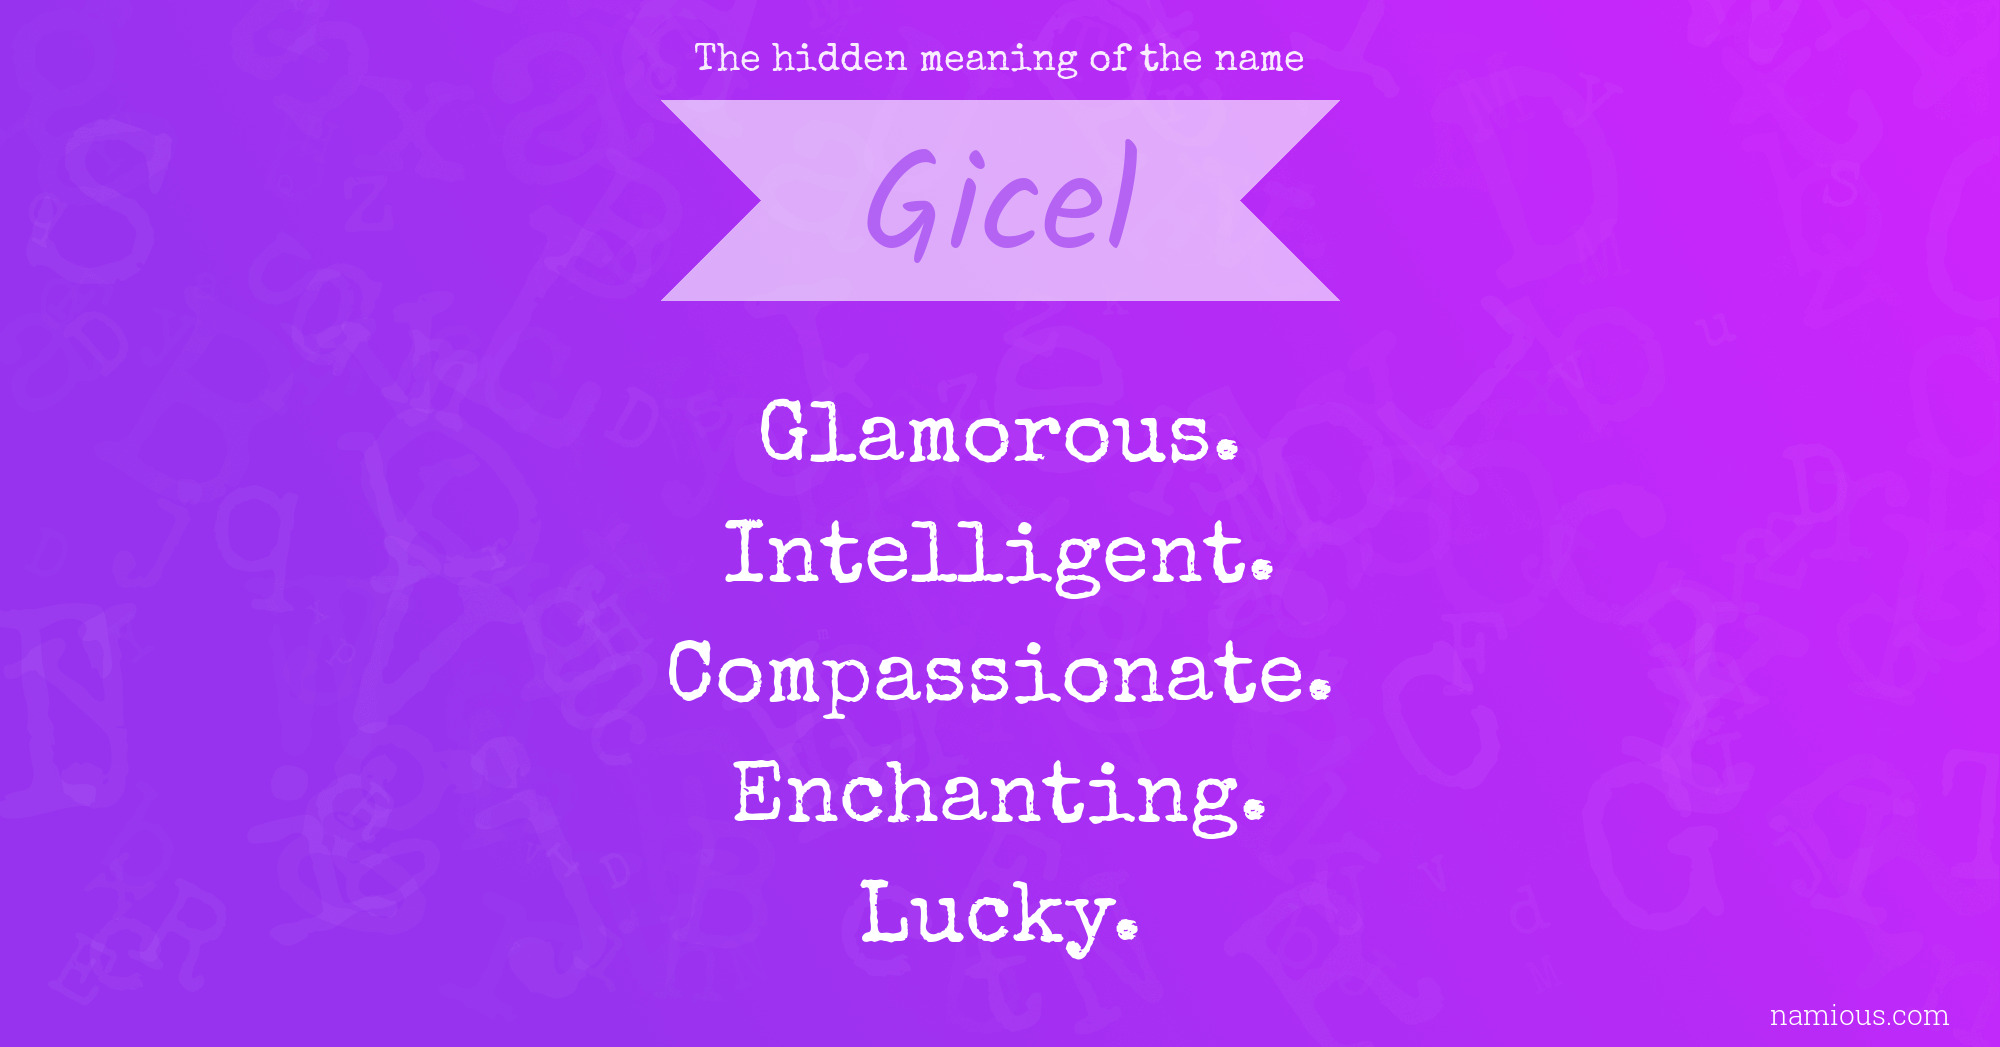 The hidden meaning of the name Gicel